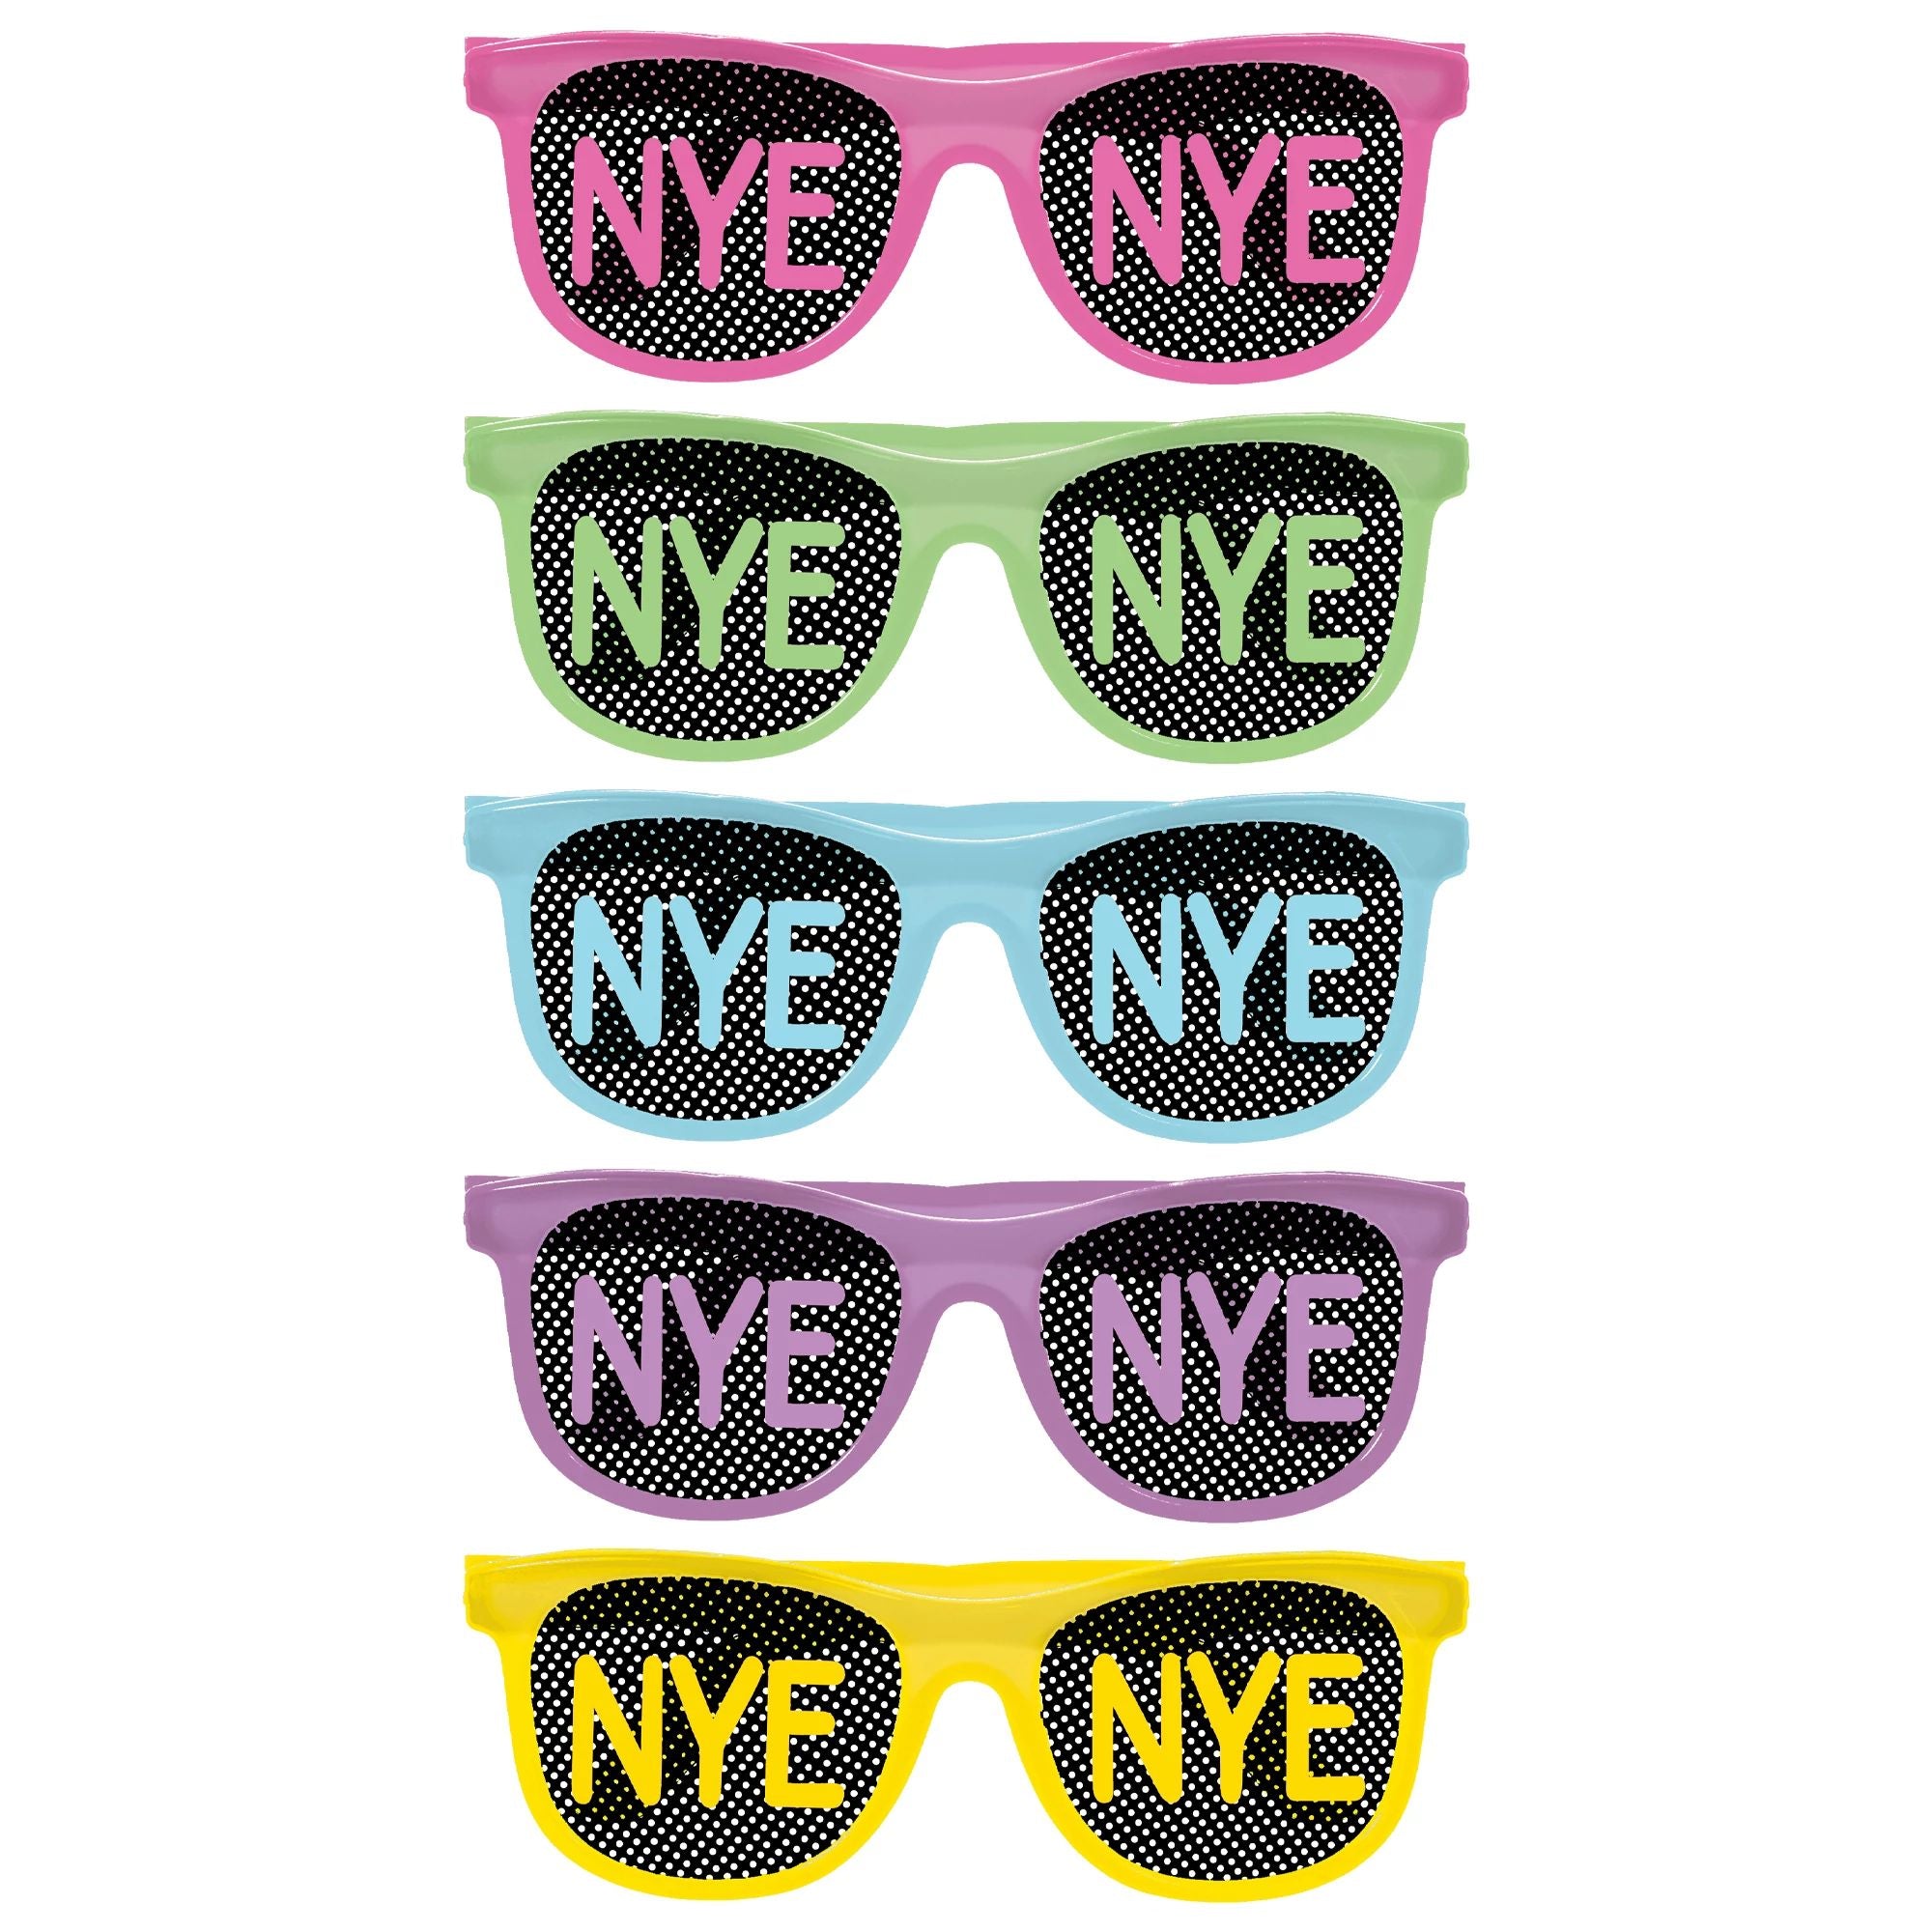 Amscan HOLIDAY: NEW YEAR'S NYE Printed Plastic Glow In The Dark Glasses - Colorful